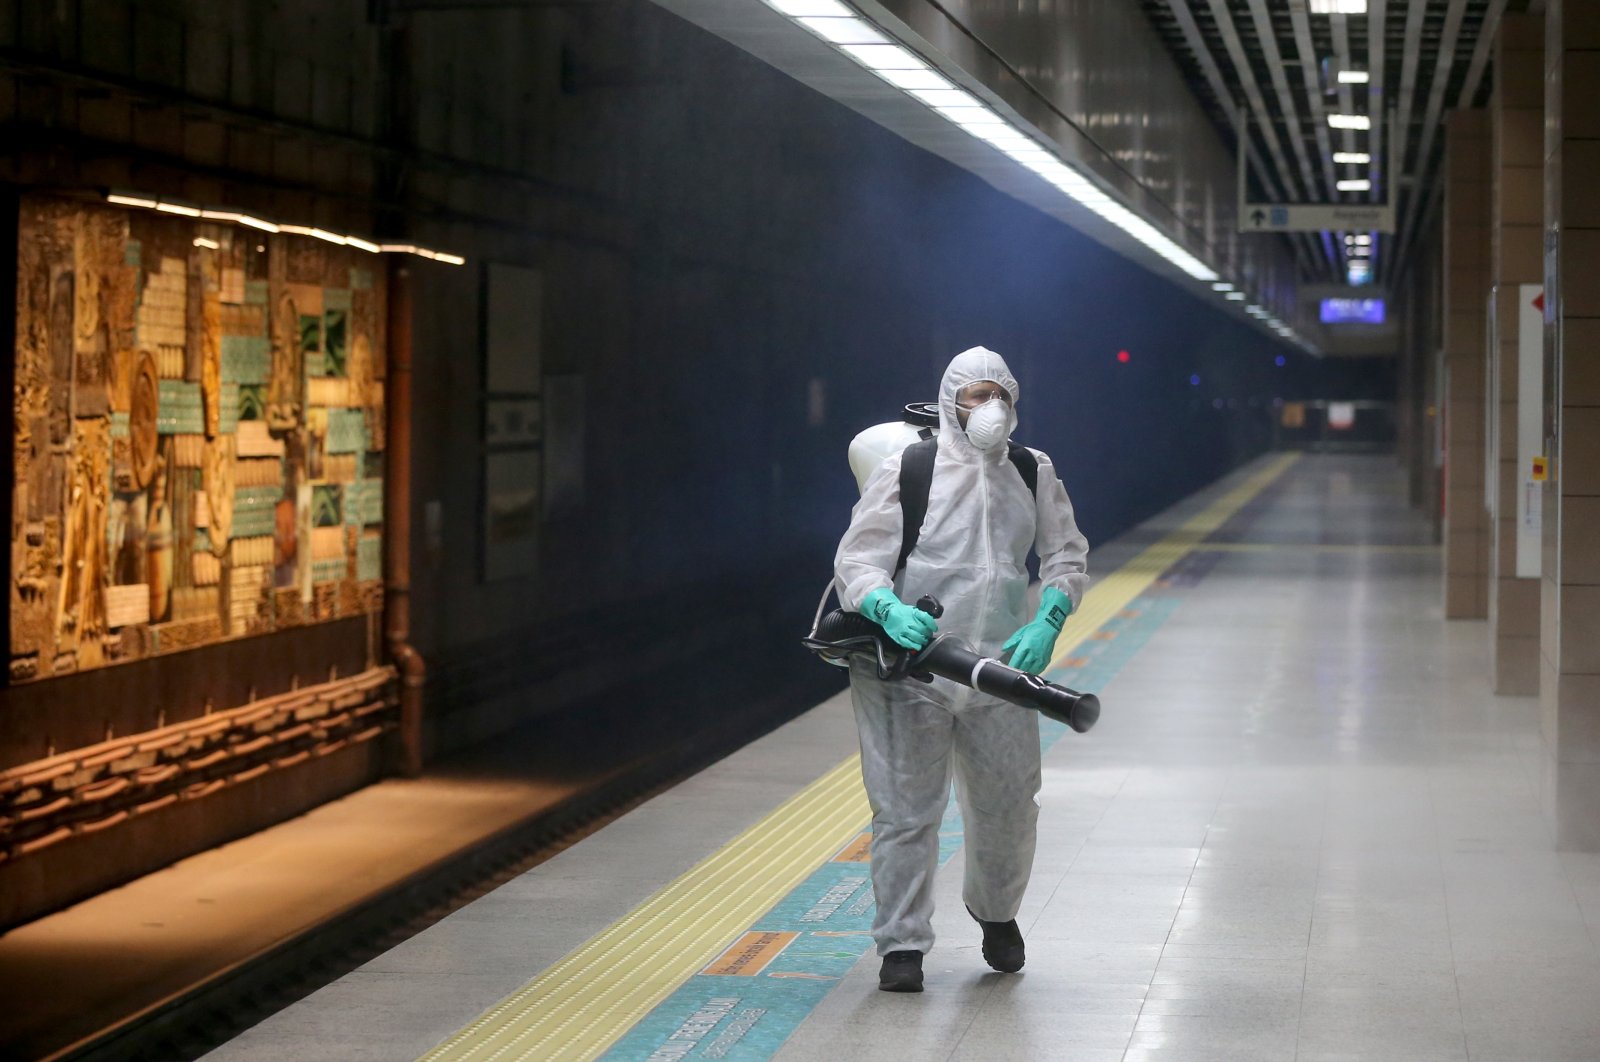 A worker sprays disinfectant at a station of the Marmaray underwater rail line, which connects Istanbul's Asian and European sides, Mar. 6, 2020. (AA Photo)